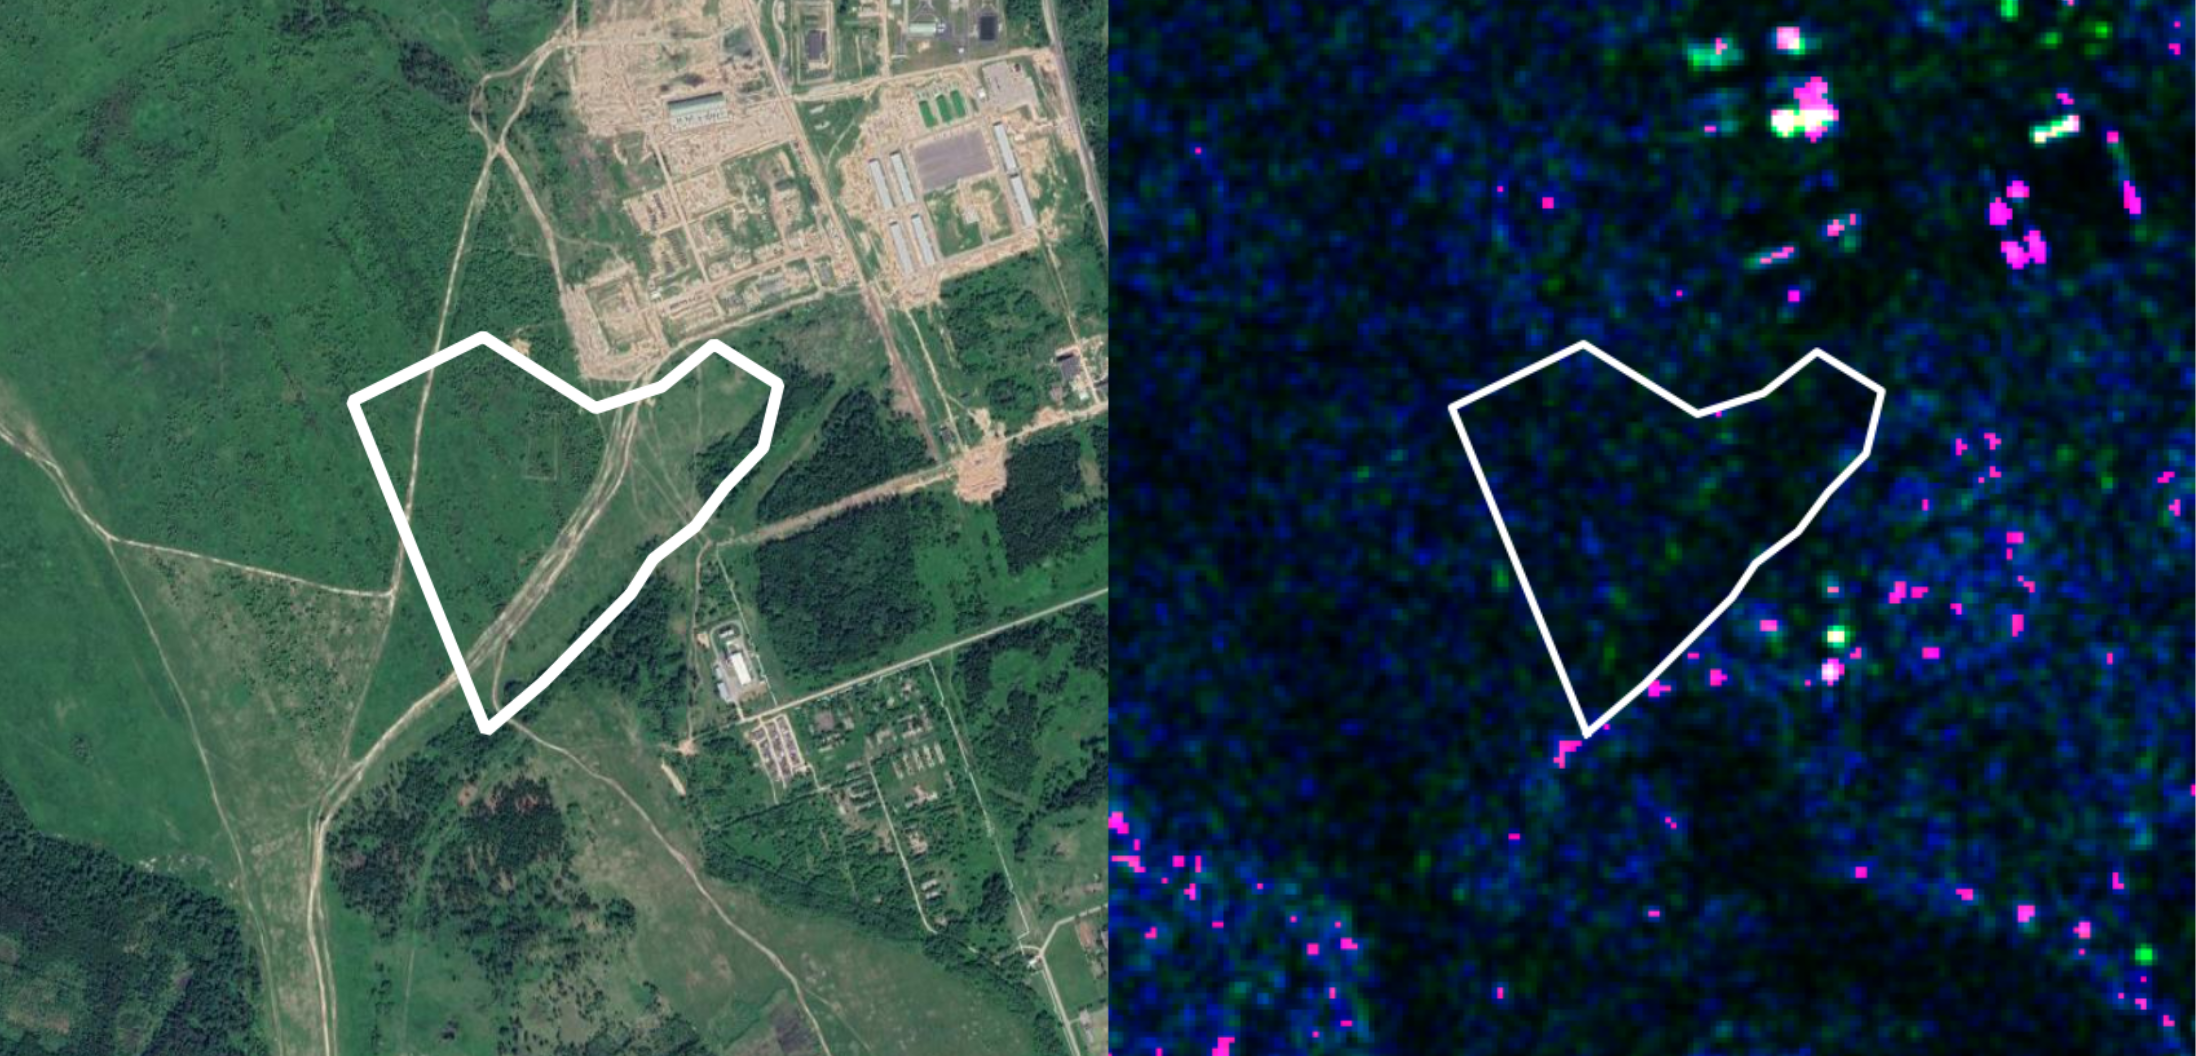 On the left is the image from Google Satellite in the same area as above, on the right are the data from the radar sensor Sentinel-1 for the past period, when the military equipment was not there.